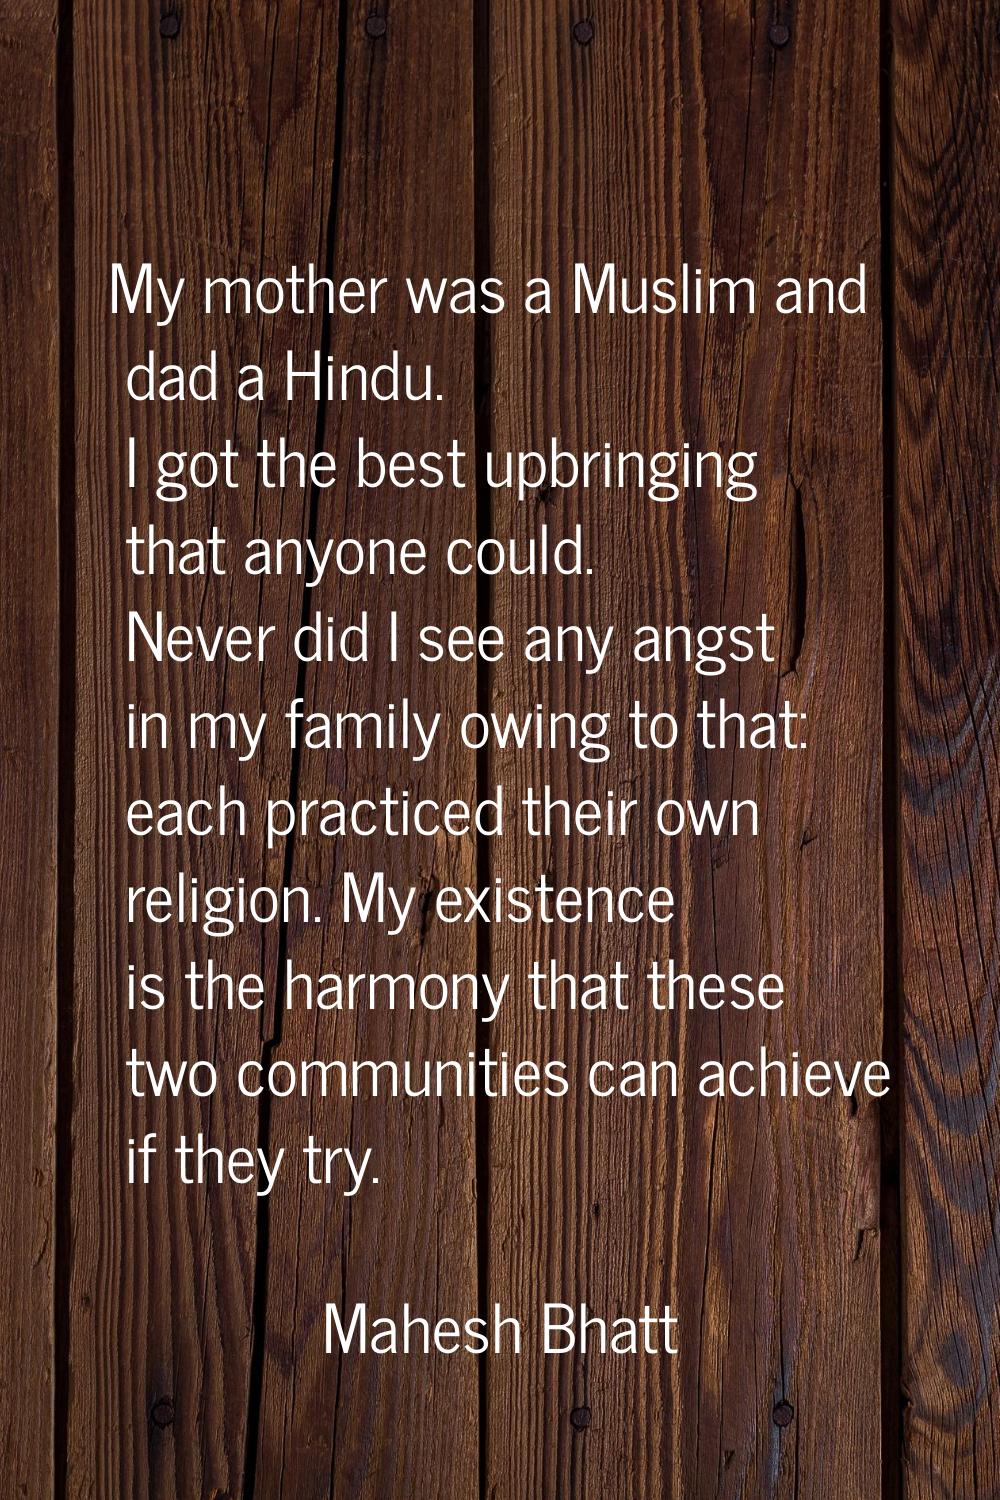 My mother was a Muslim and dad a Hindu. I got the best upbringing that anyone could. Never did I se